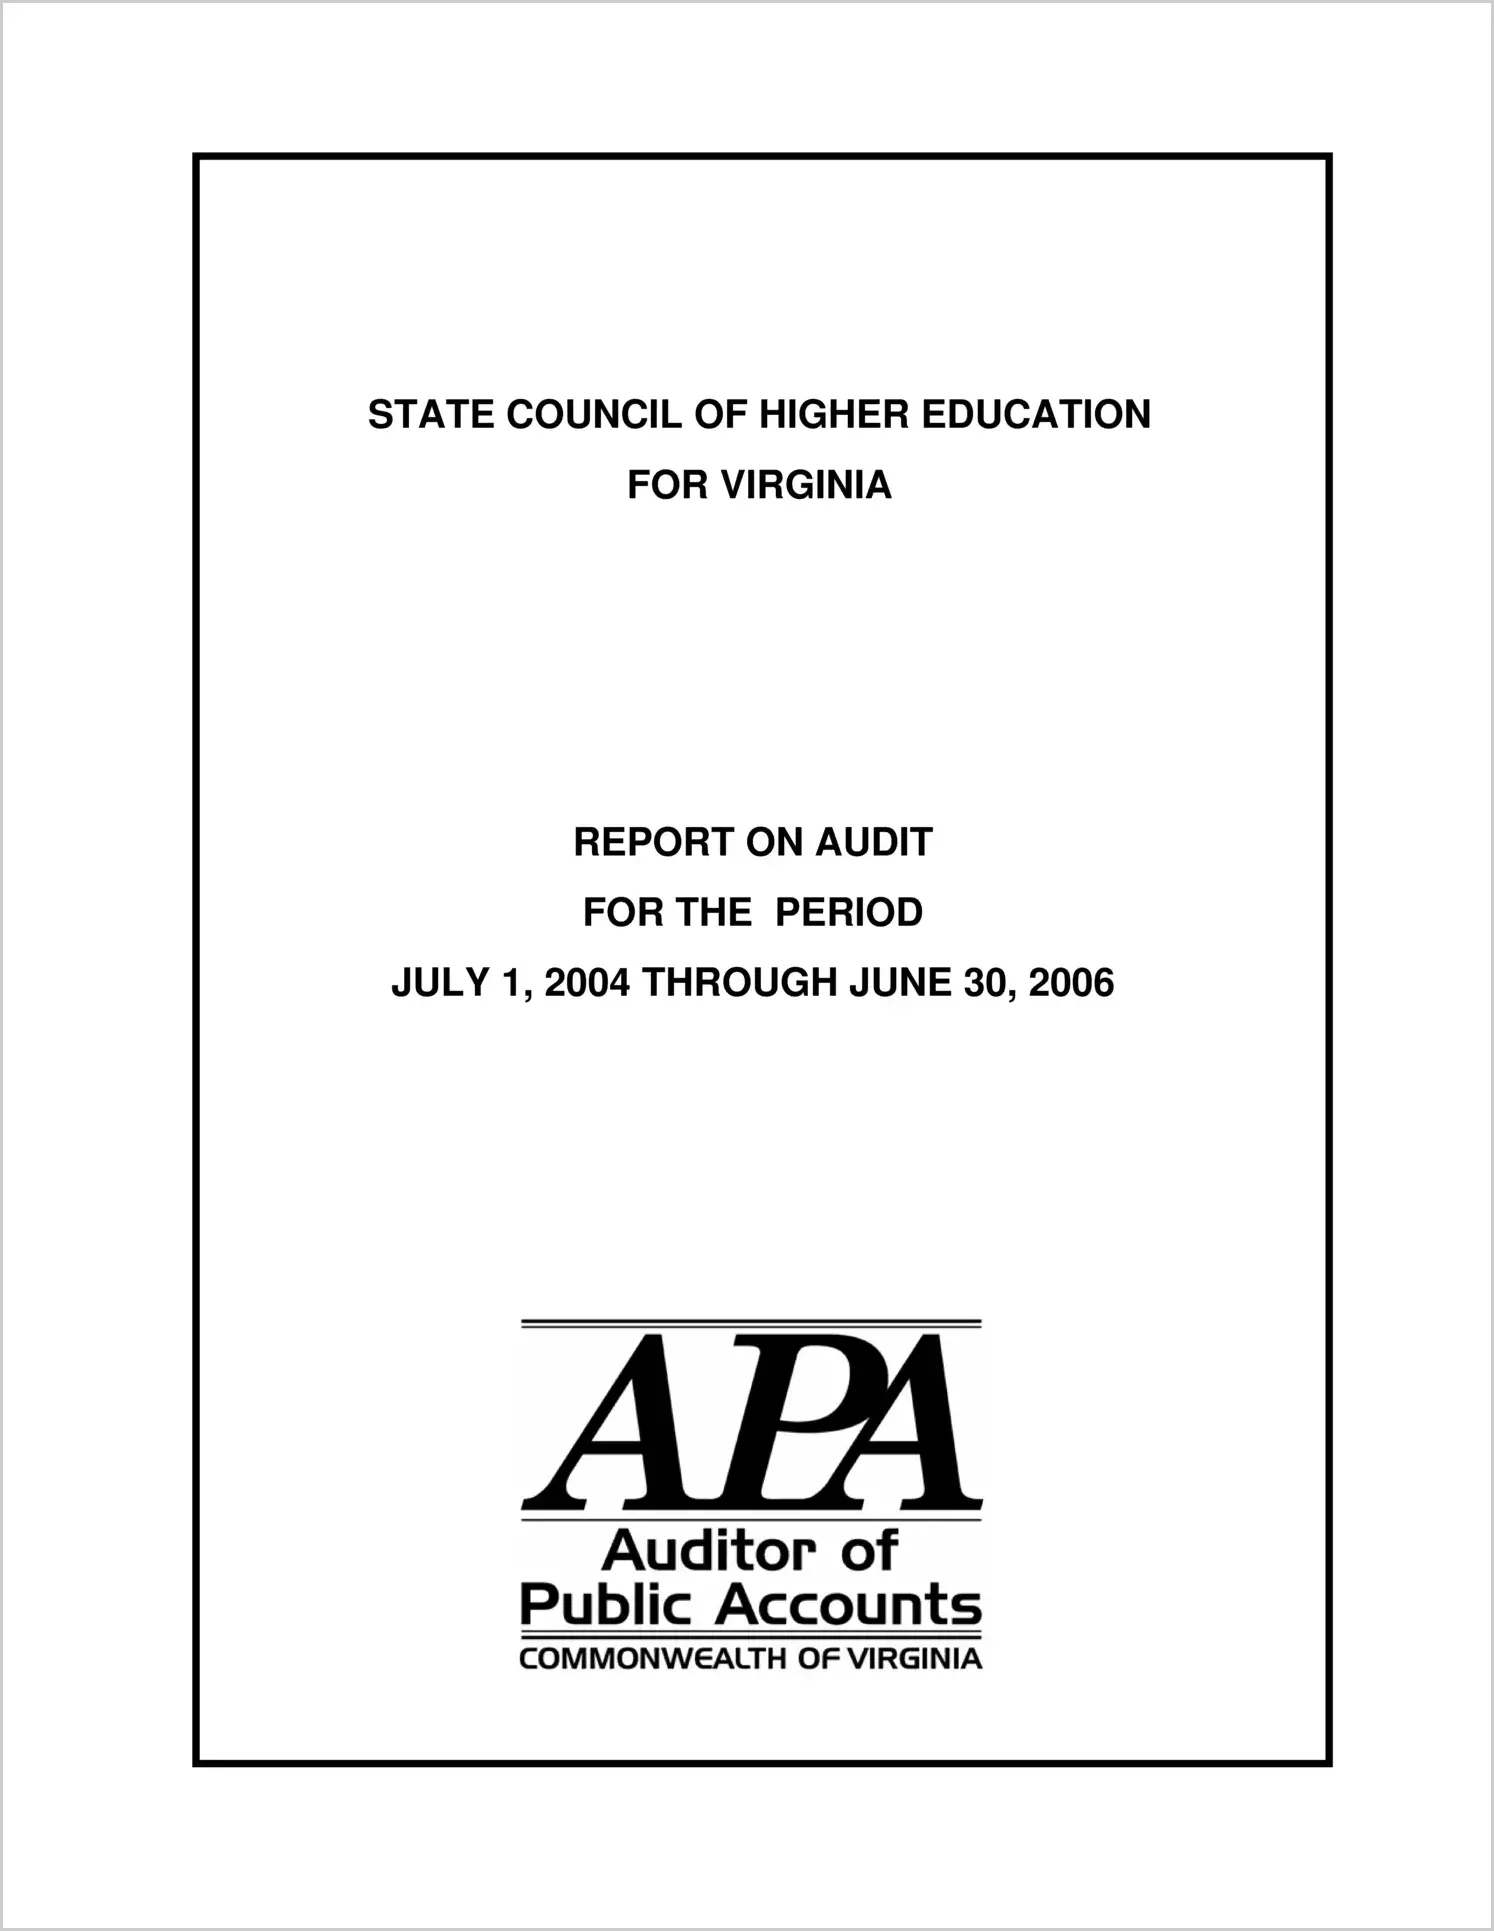 State Council of Higher Education for Virginia for the period July 1, 2004 through June 30, 2006